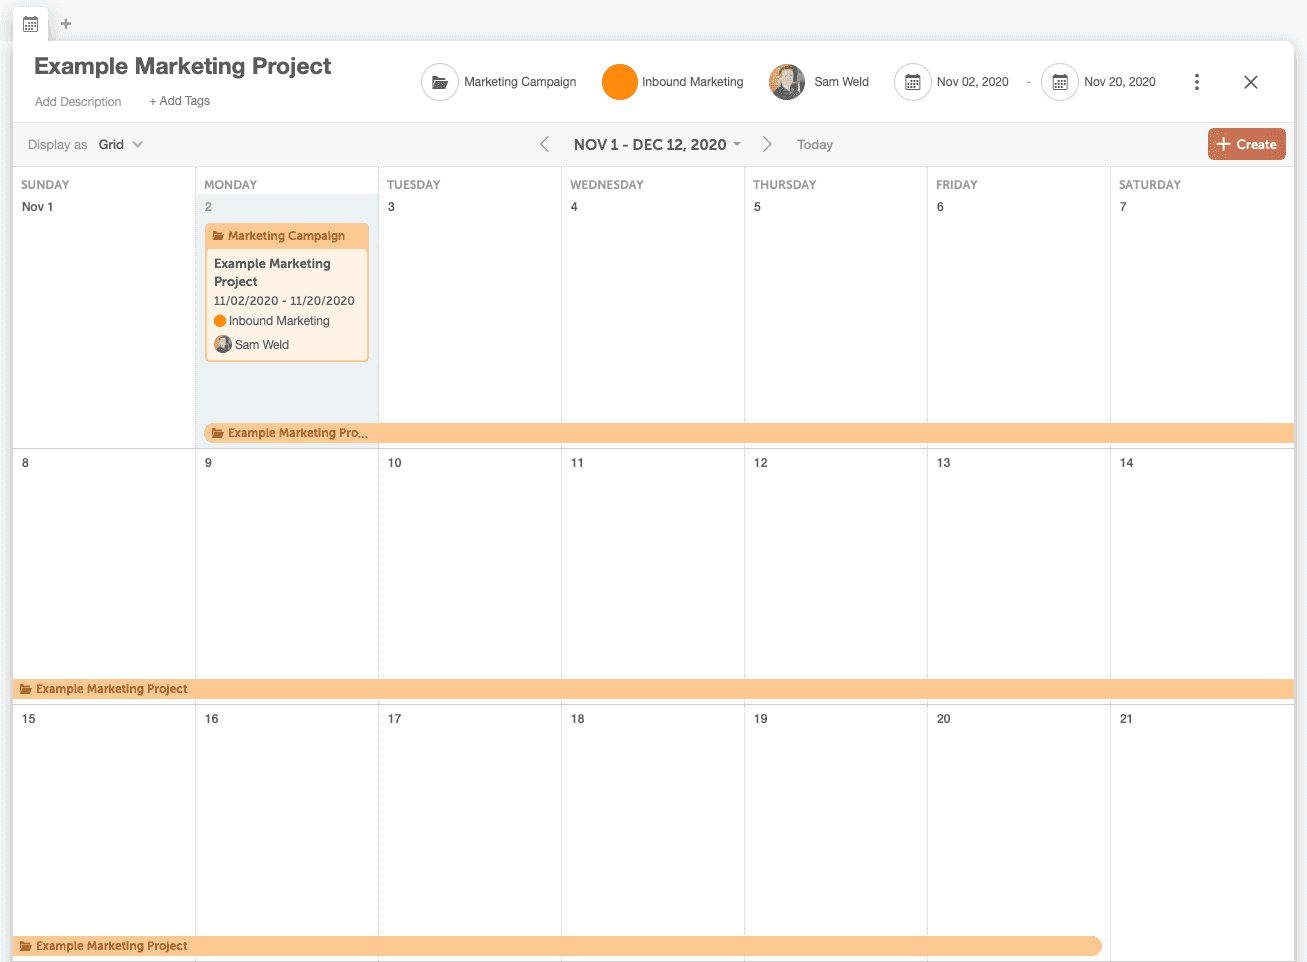 Calendar view of projects